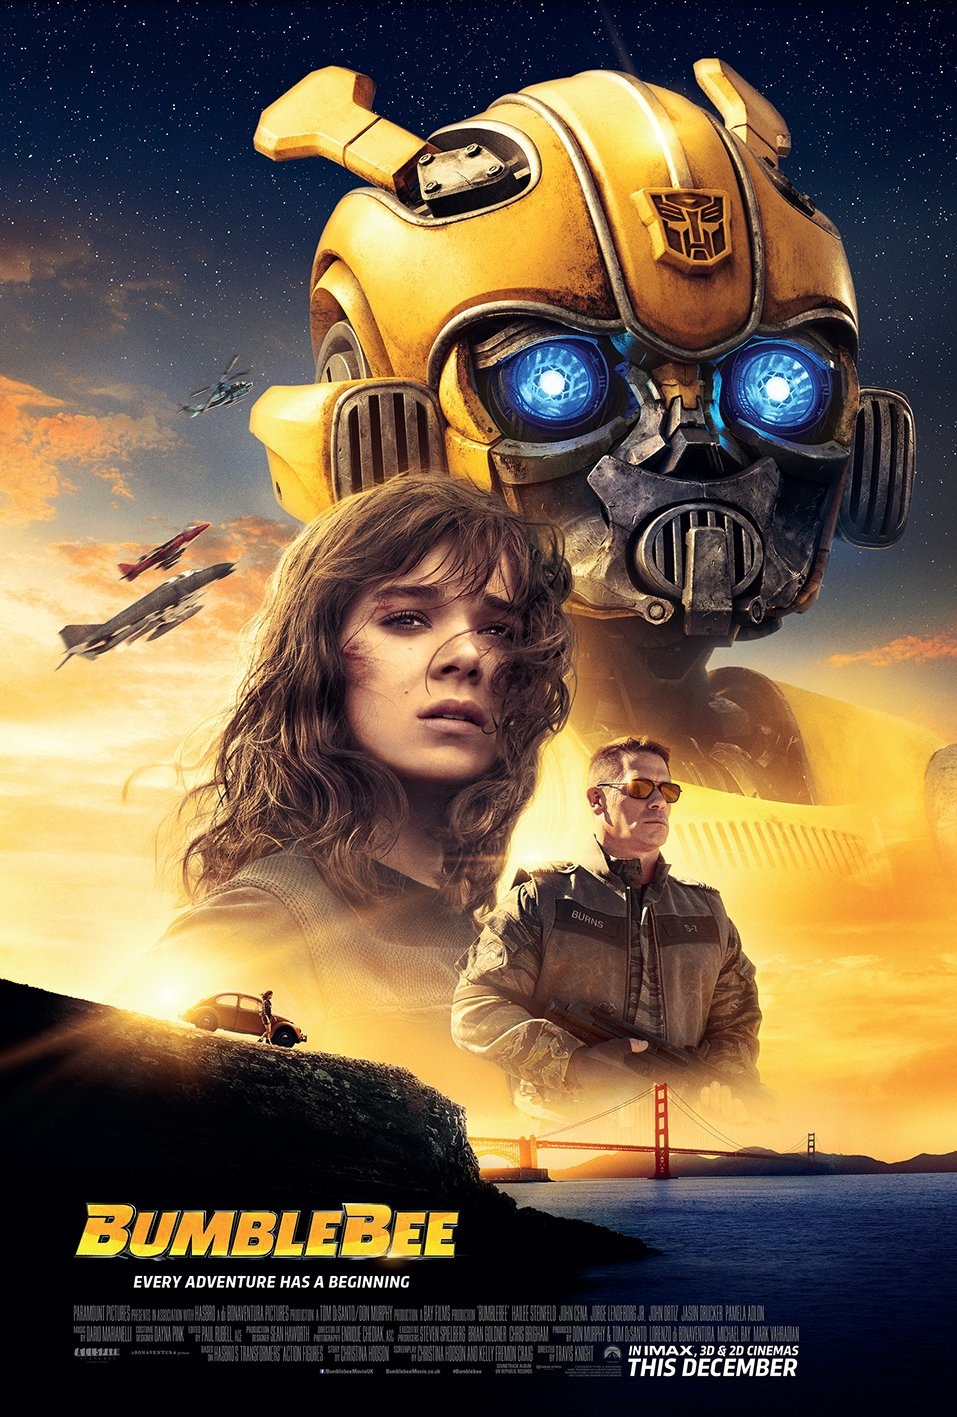 BUMBLEBEE Check Out The Awesome International Poster For Paramount's